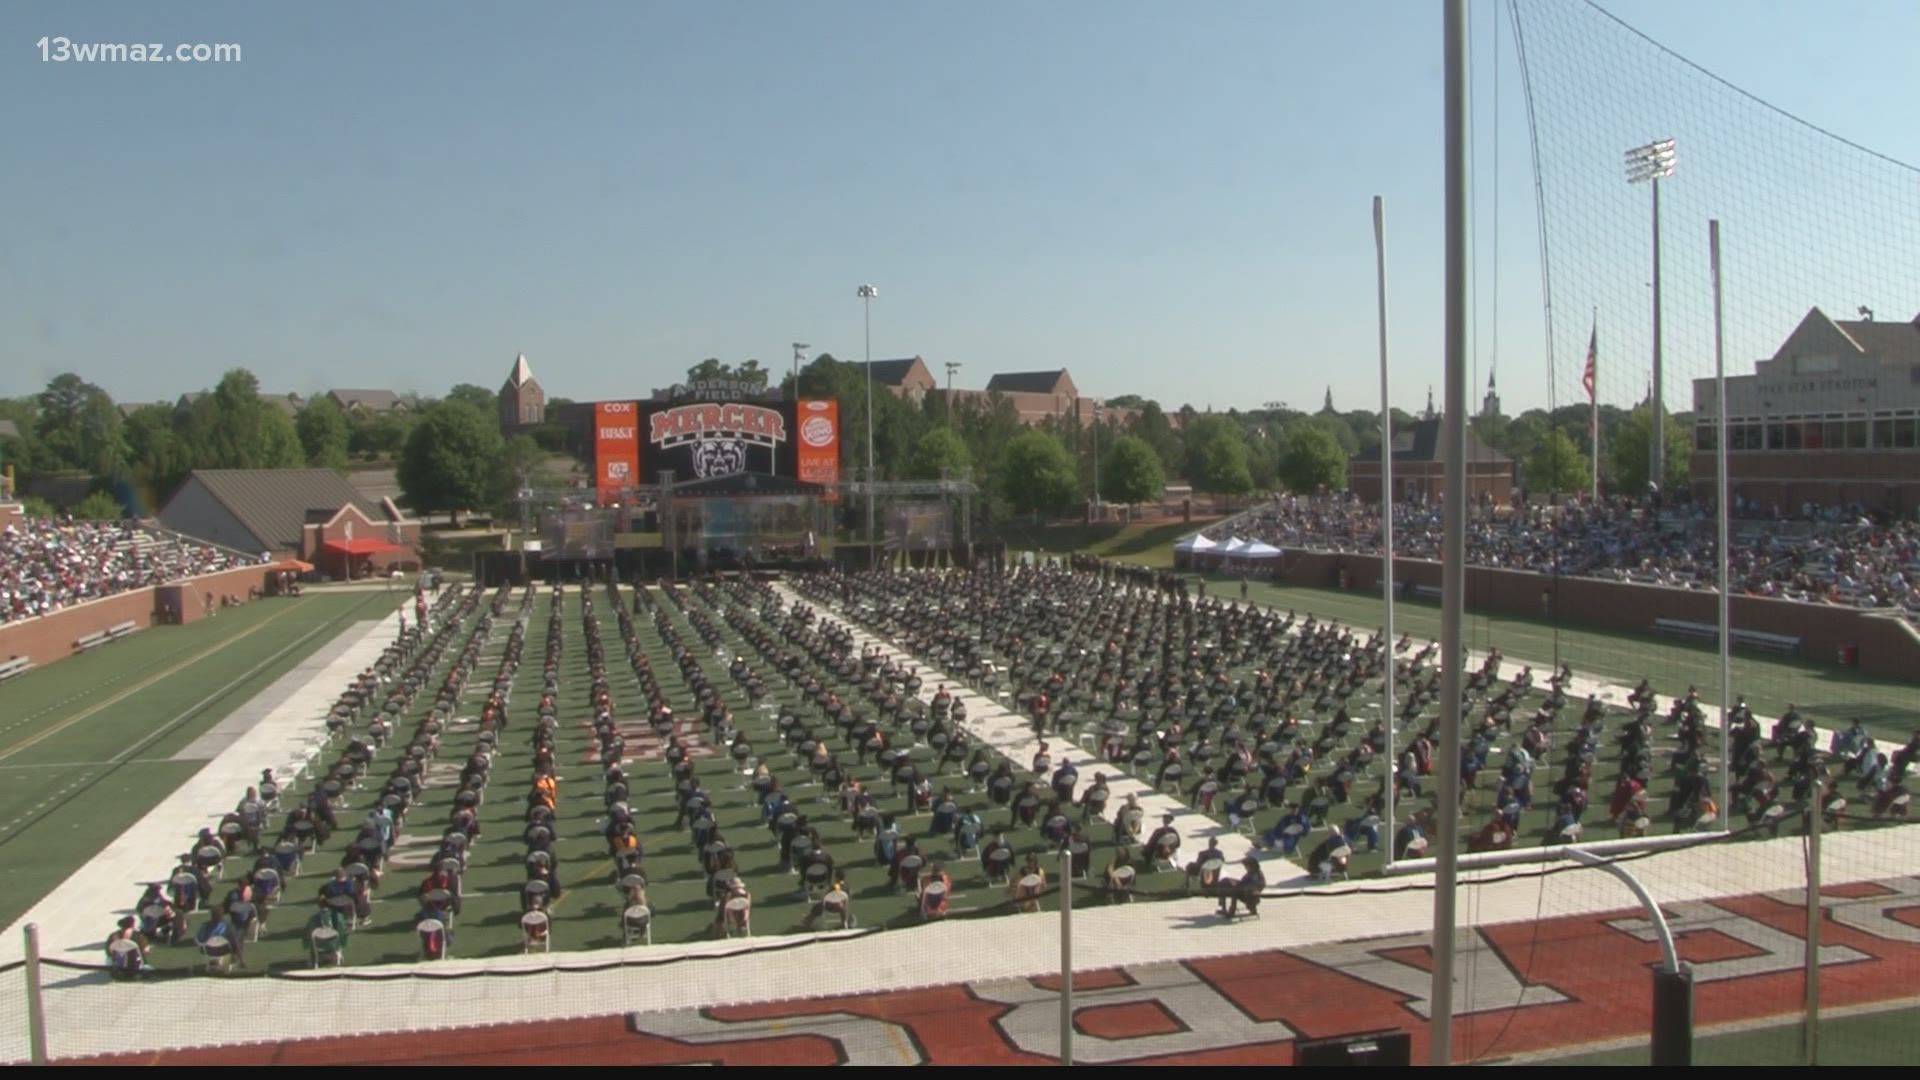 Mercer University's Macon campus holds spring 2021 commencement